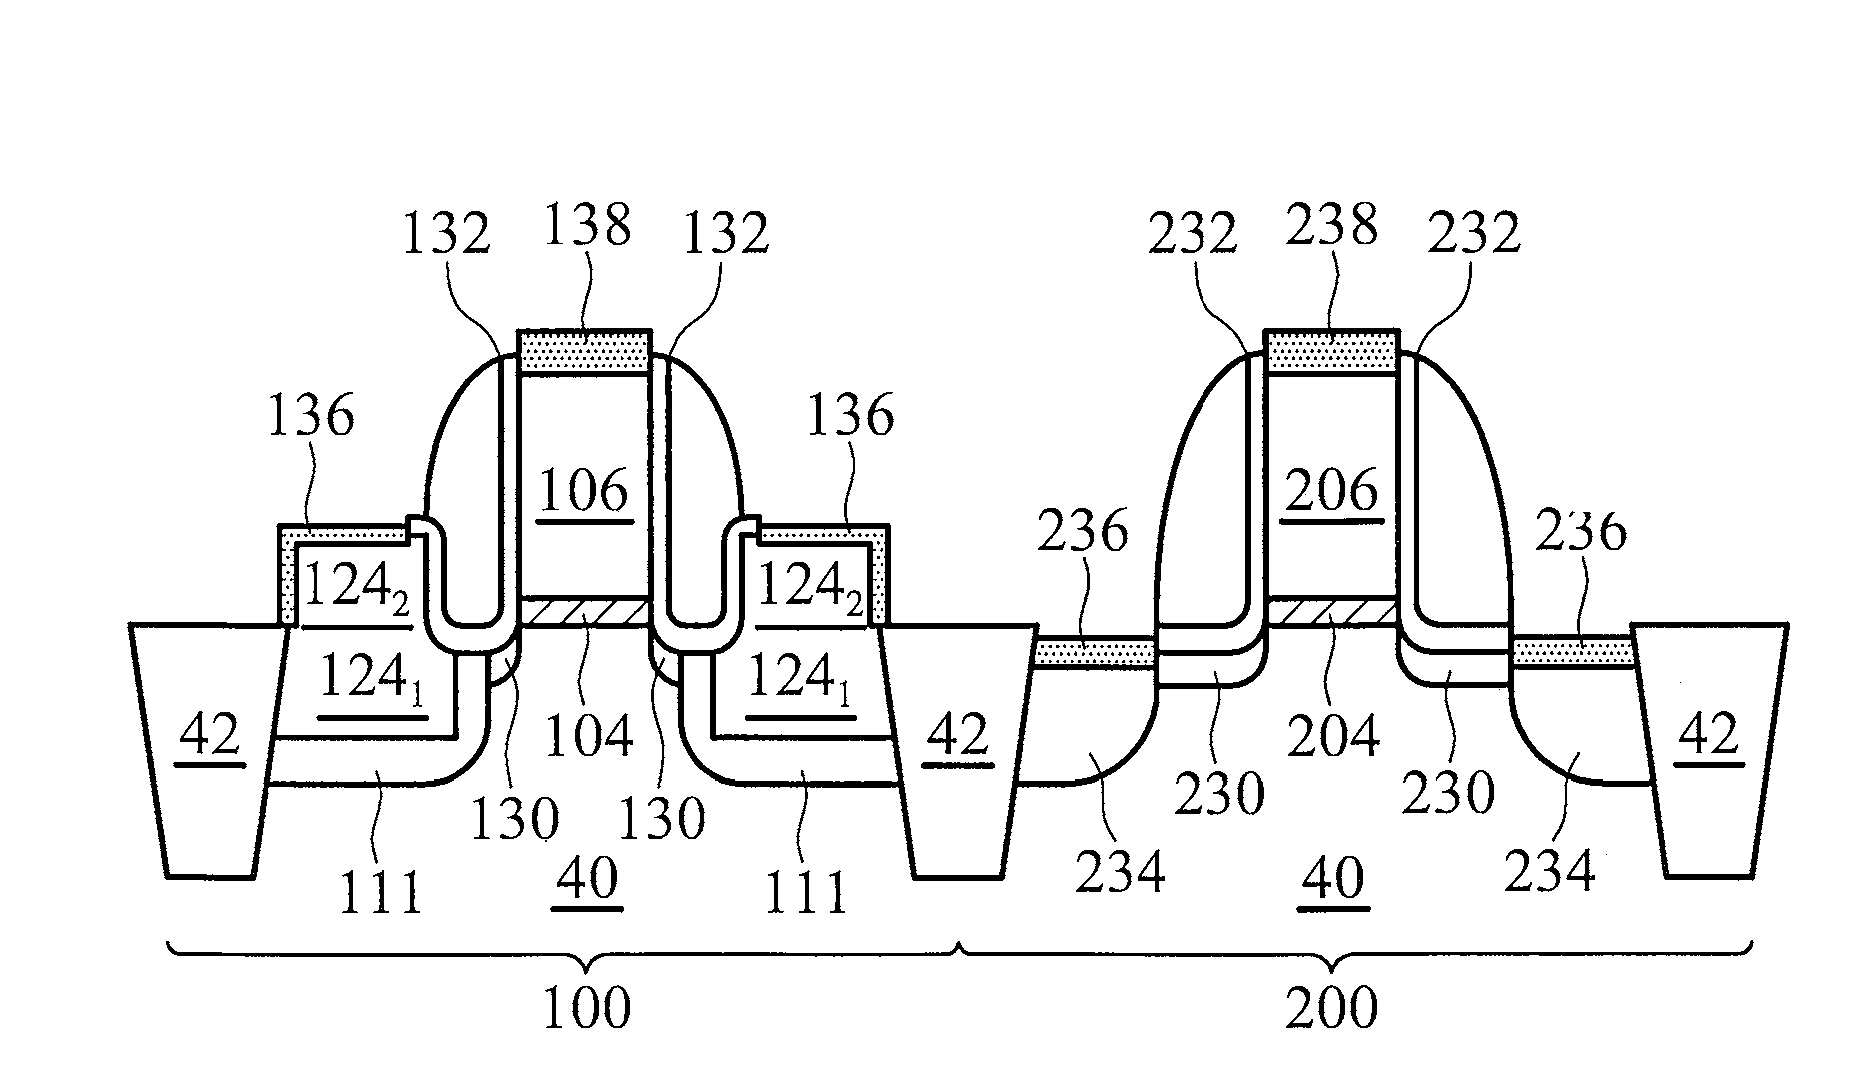 MOS devices with reduced recess on substrate surface